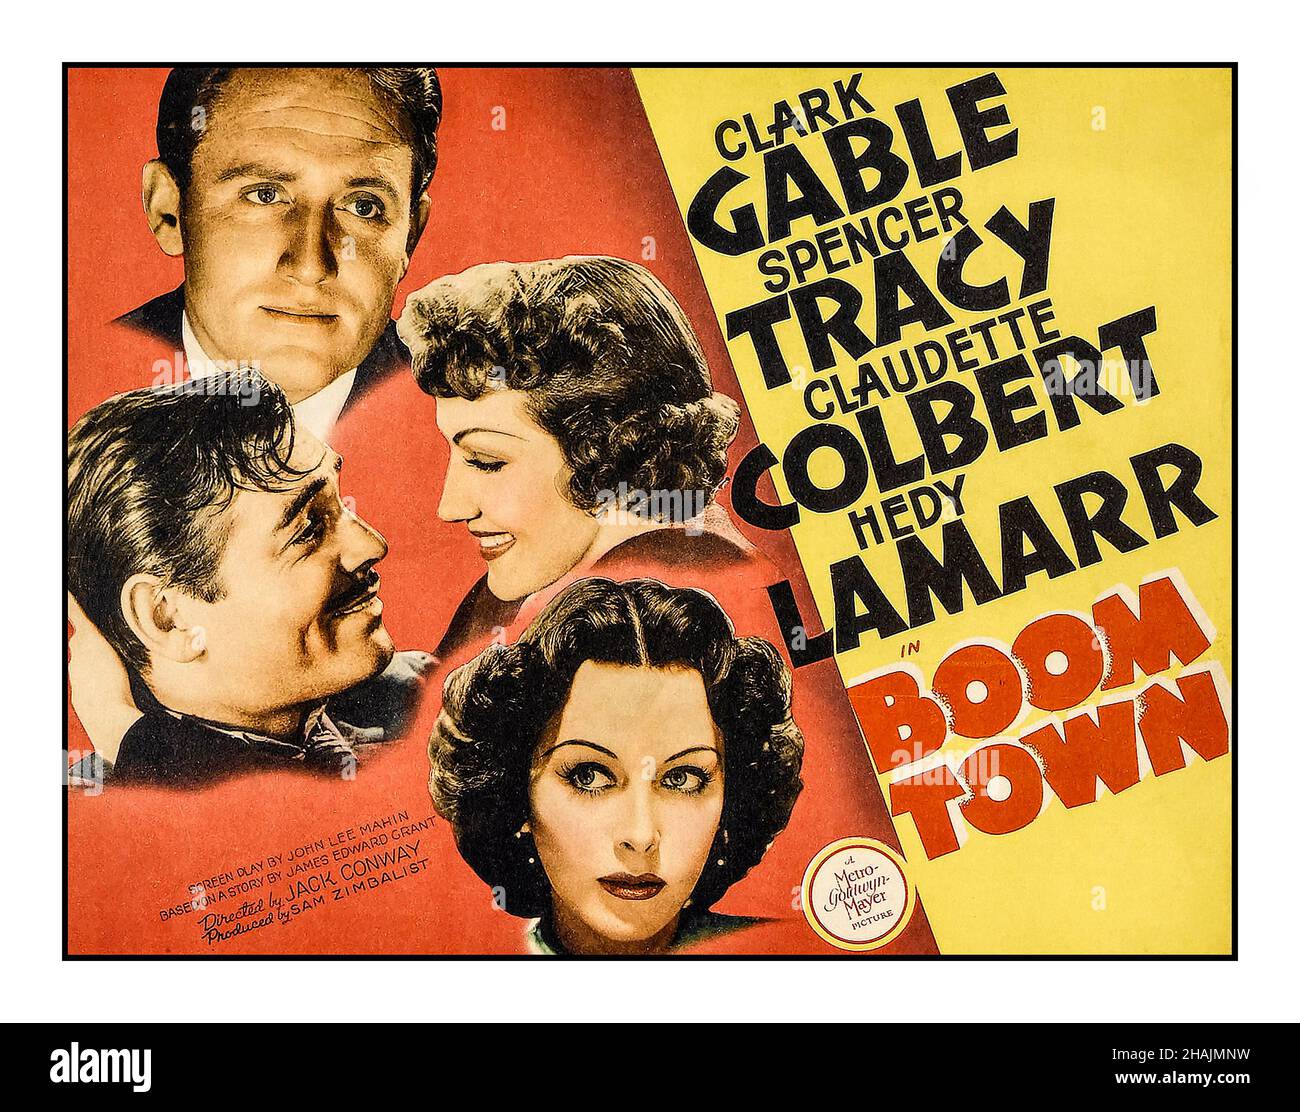 BOOM TOWN POSTER Vintage 1940 Movie Film Poster with Clark Gable Spencer Tracy Claudette Colbert and Hedy Lamarr in BOOM TOWN Directed by Jack Conway Vintage Movie Film Poster, 1940  MGM USA Stock Photo